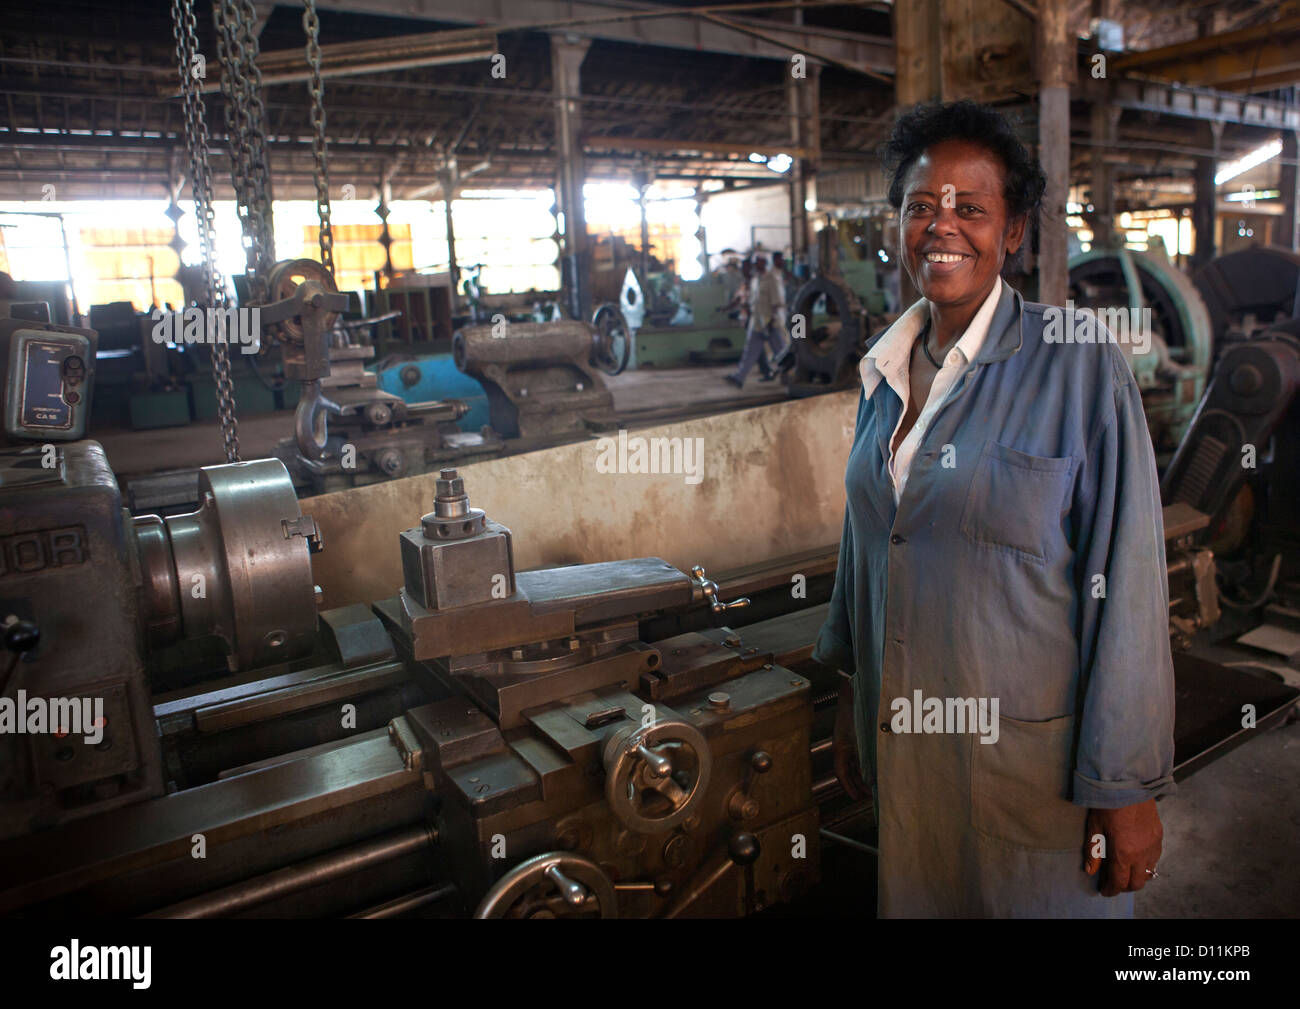 Portrait Of A Female Worker With Toothy Smile At Dire Dawa Train Station, Ethiopia Stock Photo